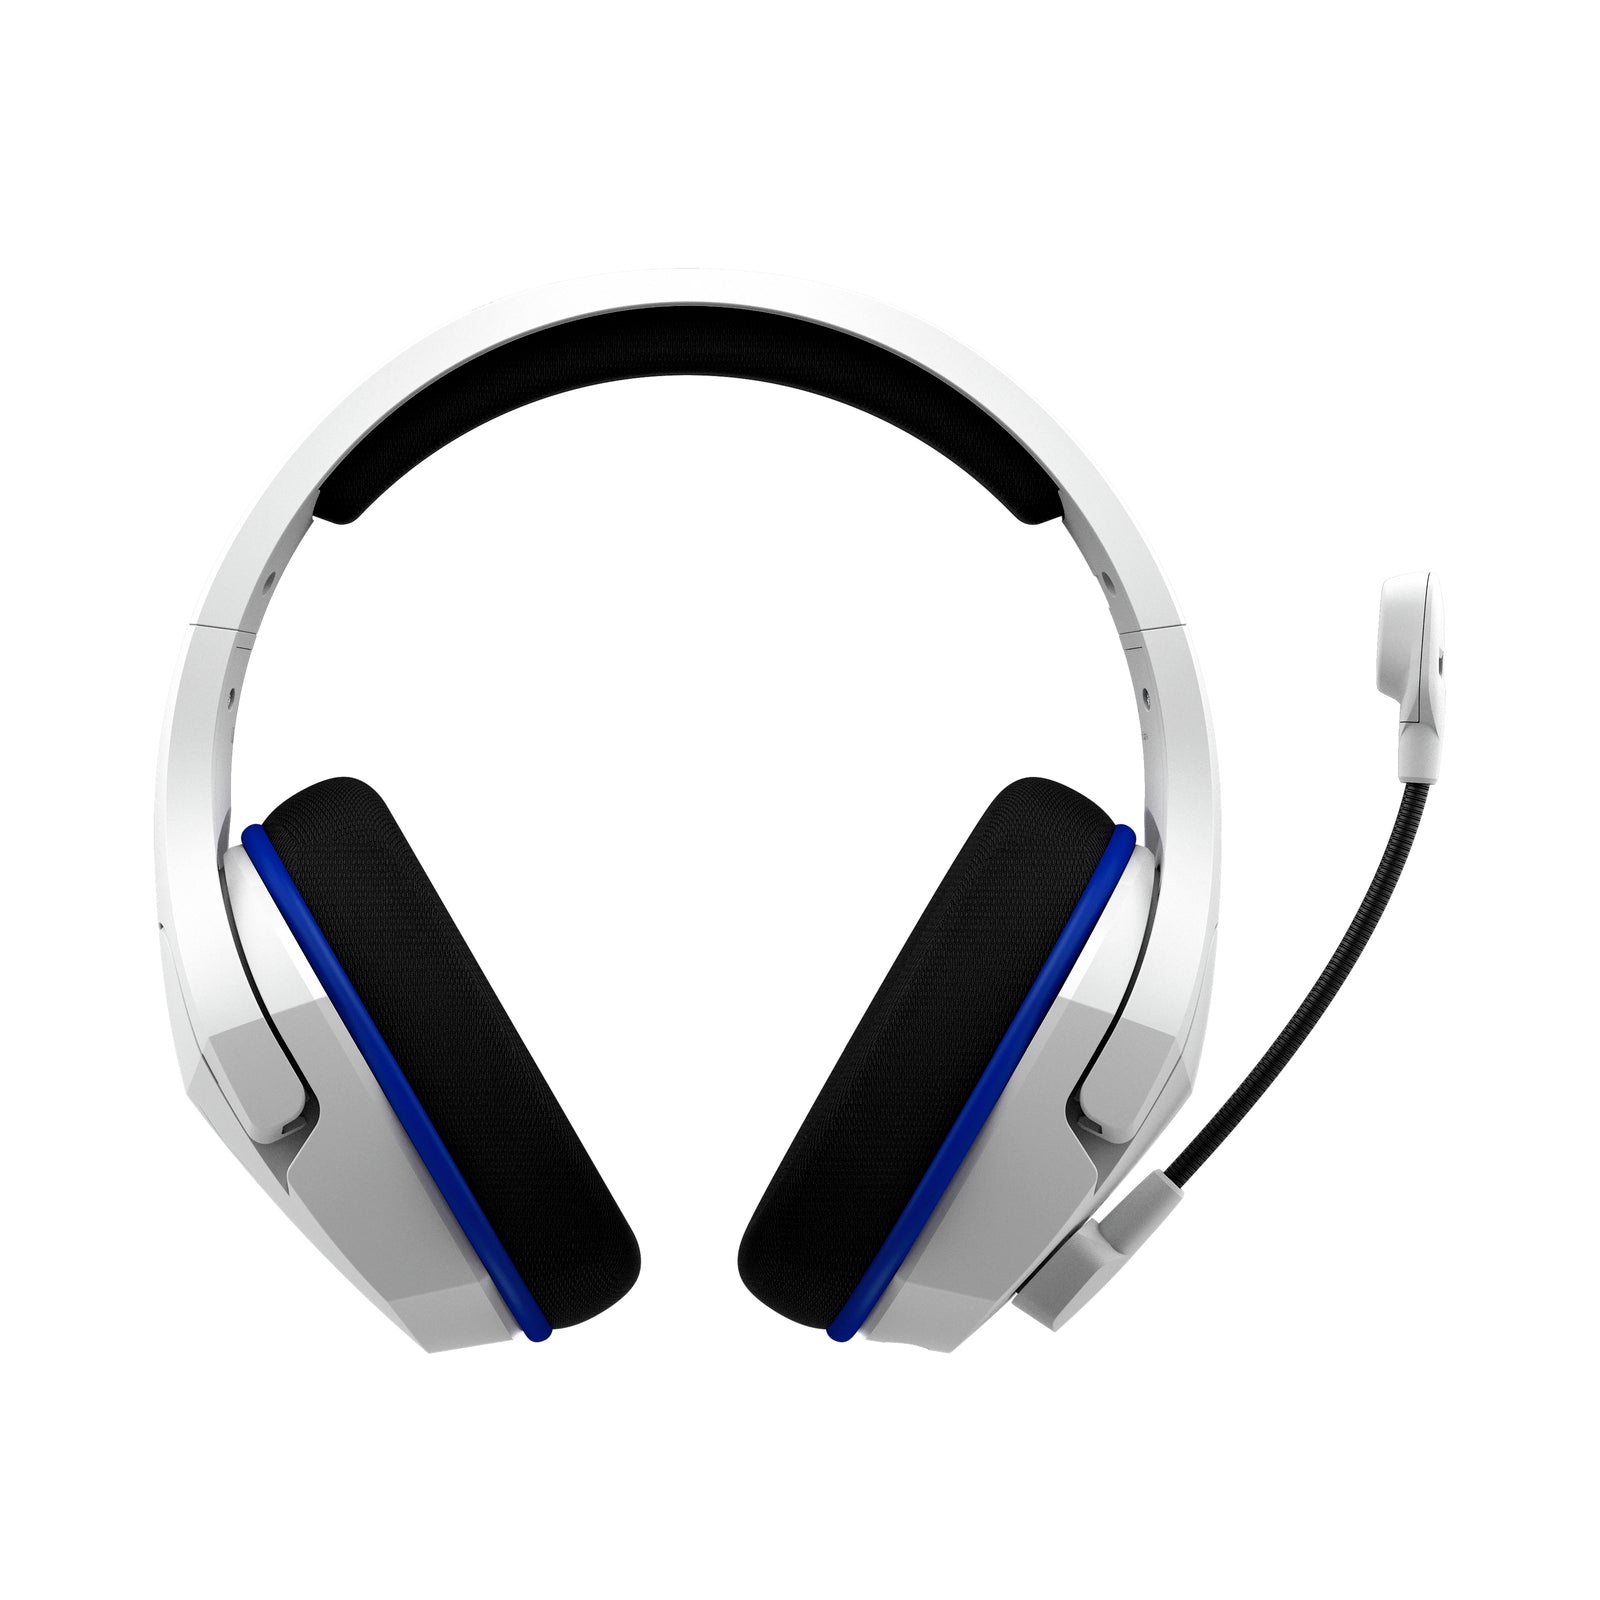 Cloud Stinger Gaming Headset for |